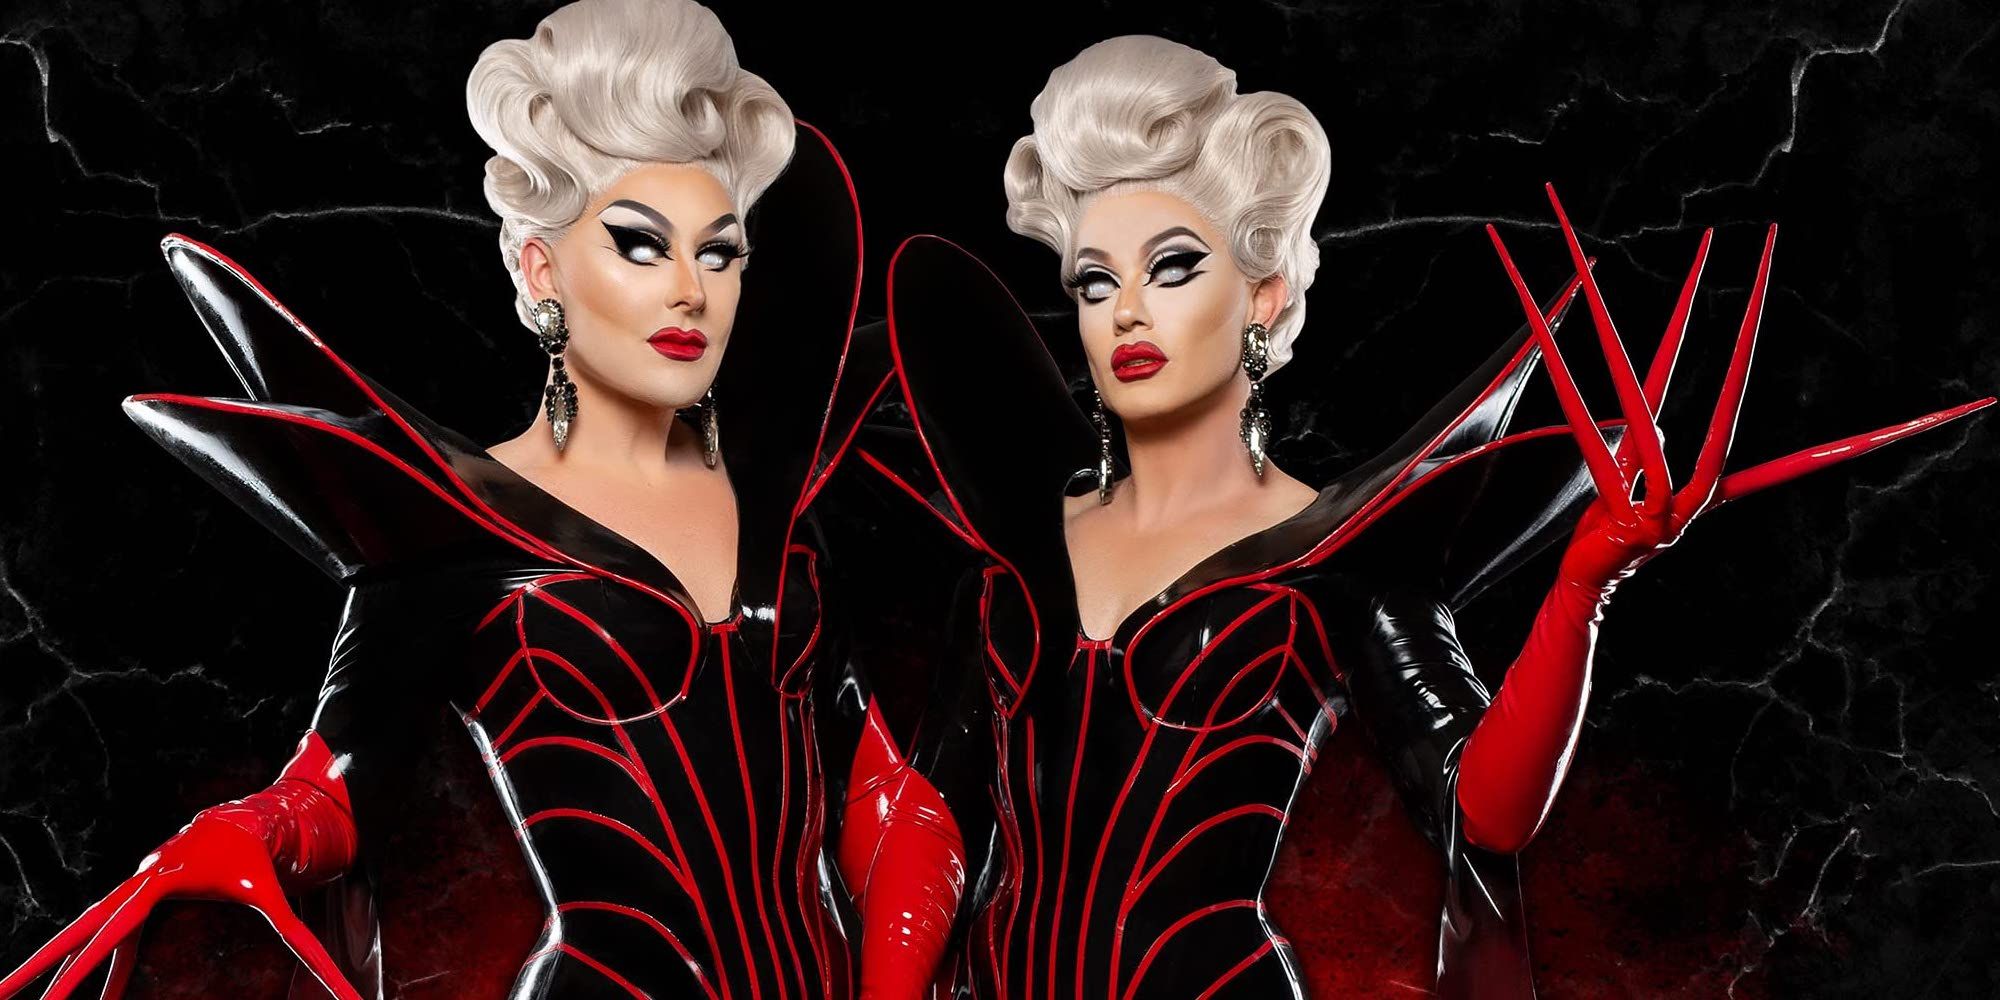 How The Boulet Brothers’ Dragula Titans Is Redefining Drag Culture